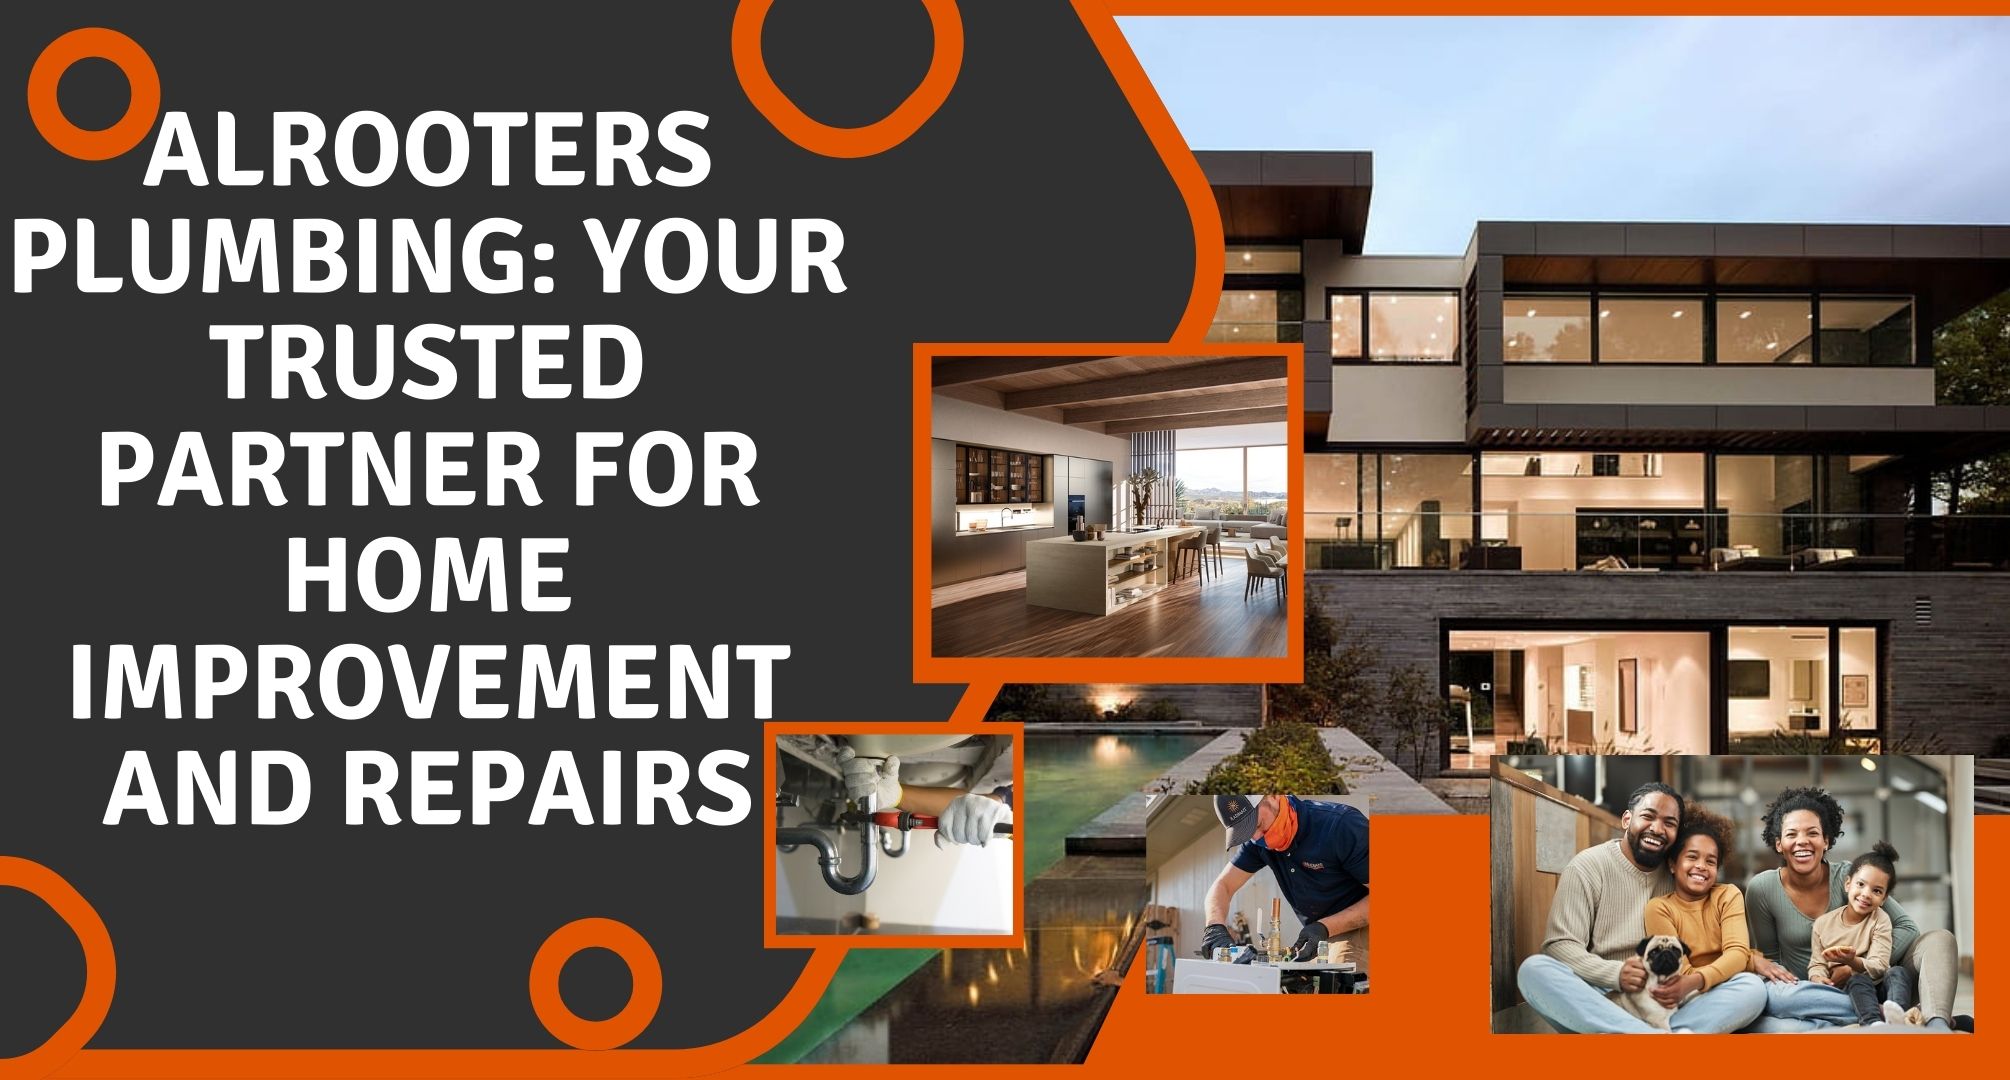 Alrooters Plumbing Your Trusted Partner for Home Improvement and Repairs